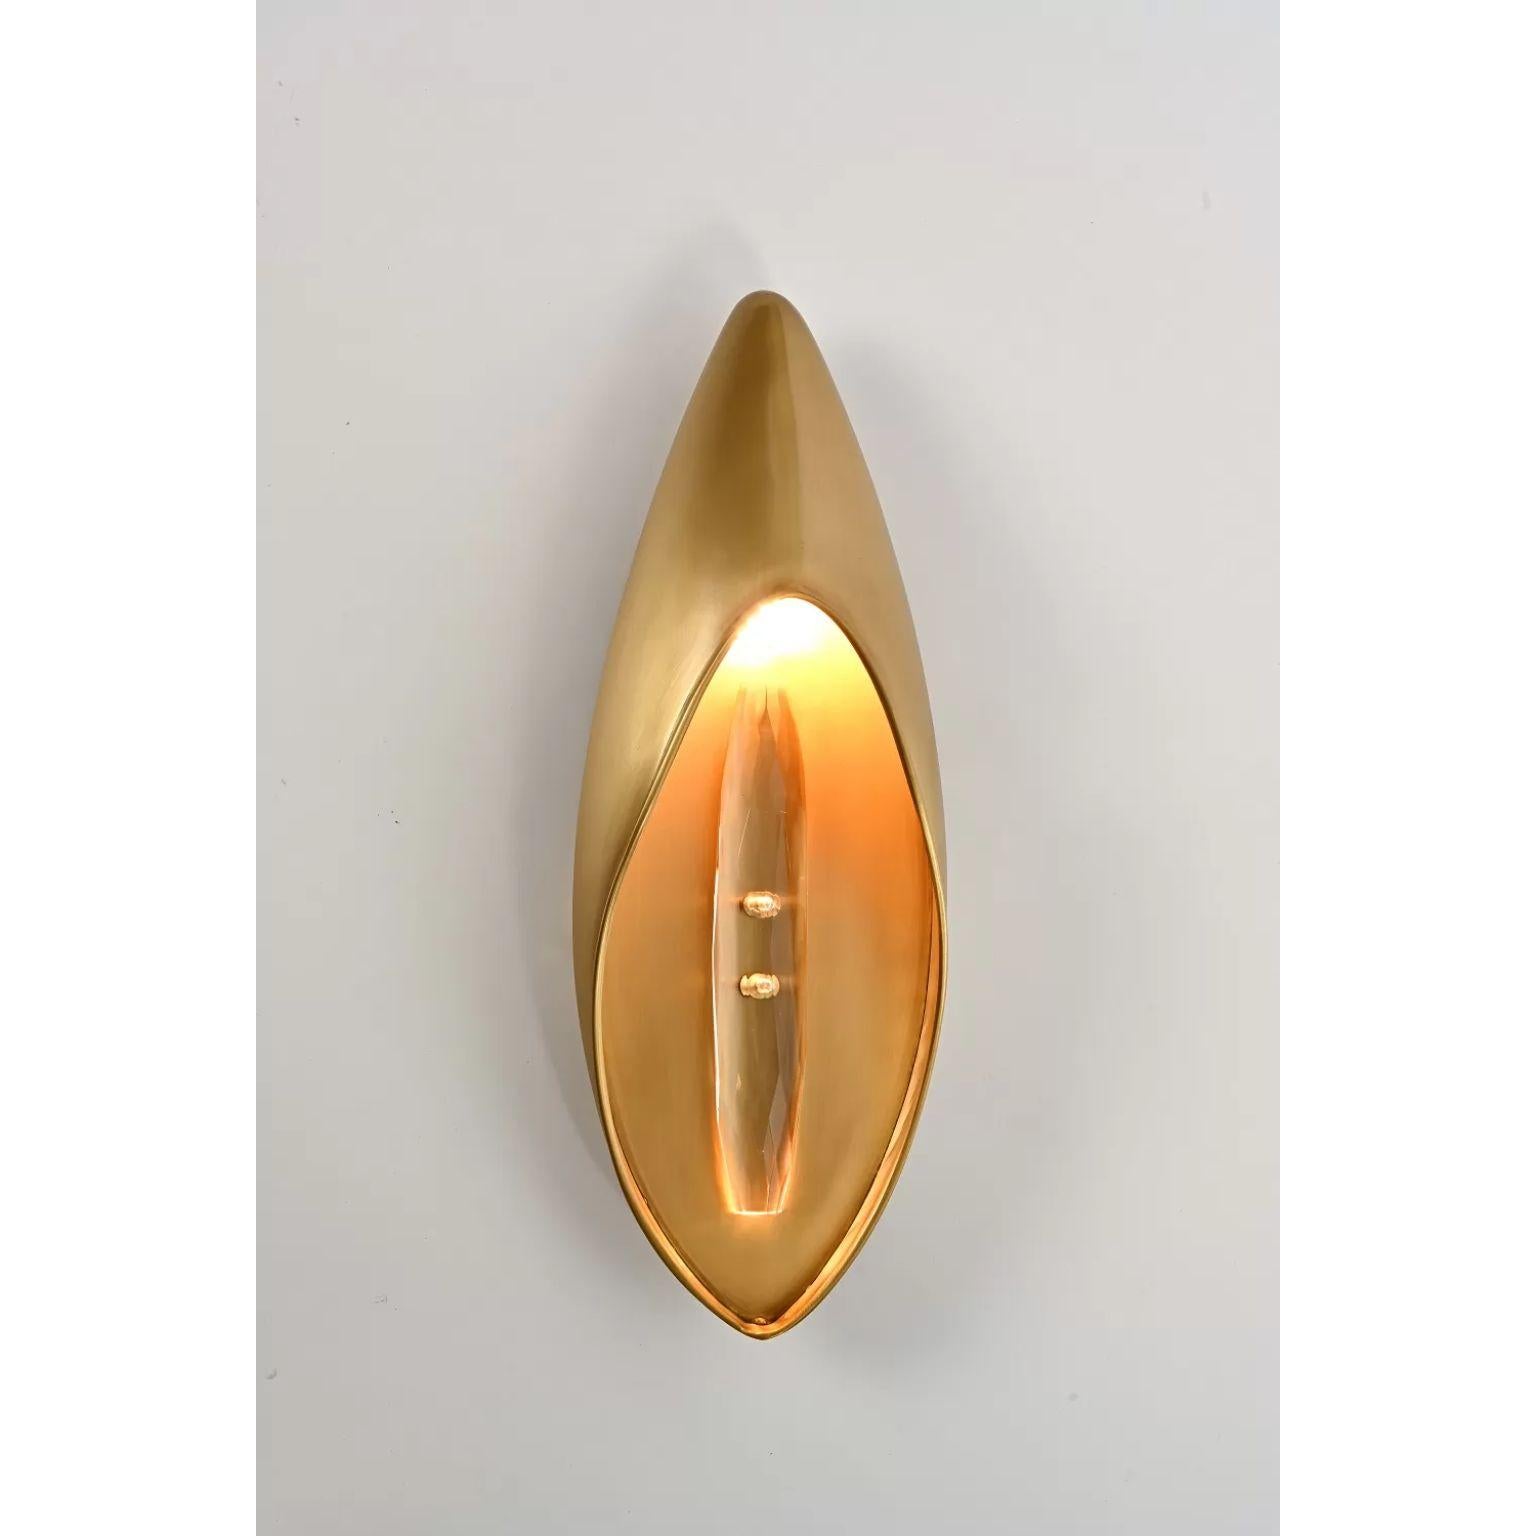 Lilly Wall Sconce by Dainte
Dimensions: D 9 x W 14 x H 40 cm.
Materials: Crystal and brass. 

The Lily Collection is minimal, modern, and textured. It embodies the lily flower’s pure beauty and is made of textured brass. The collection illustrates